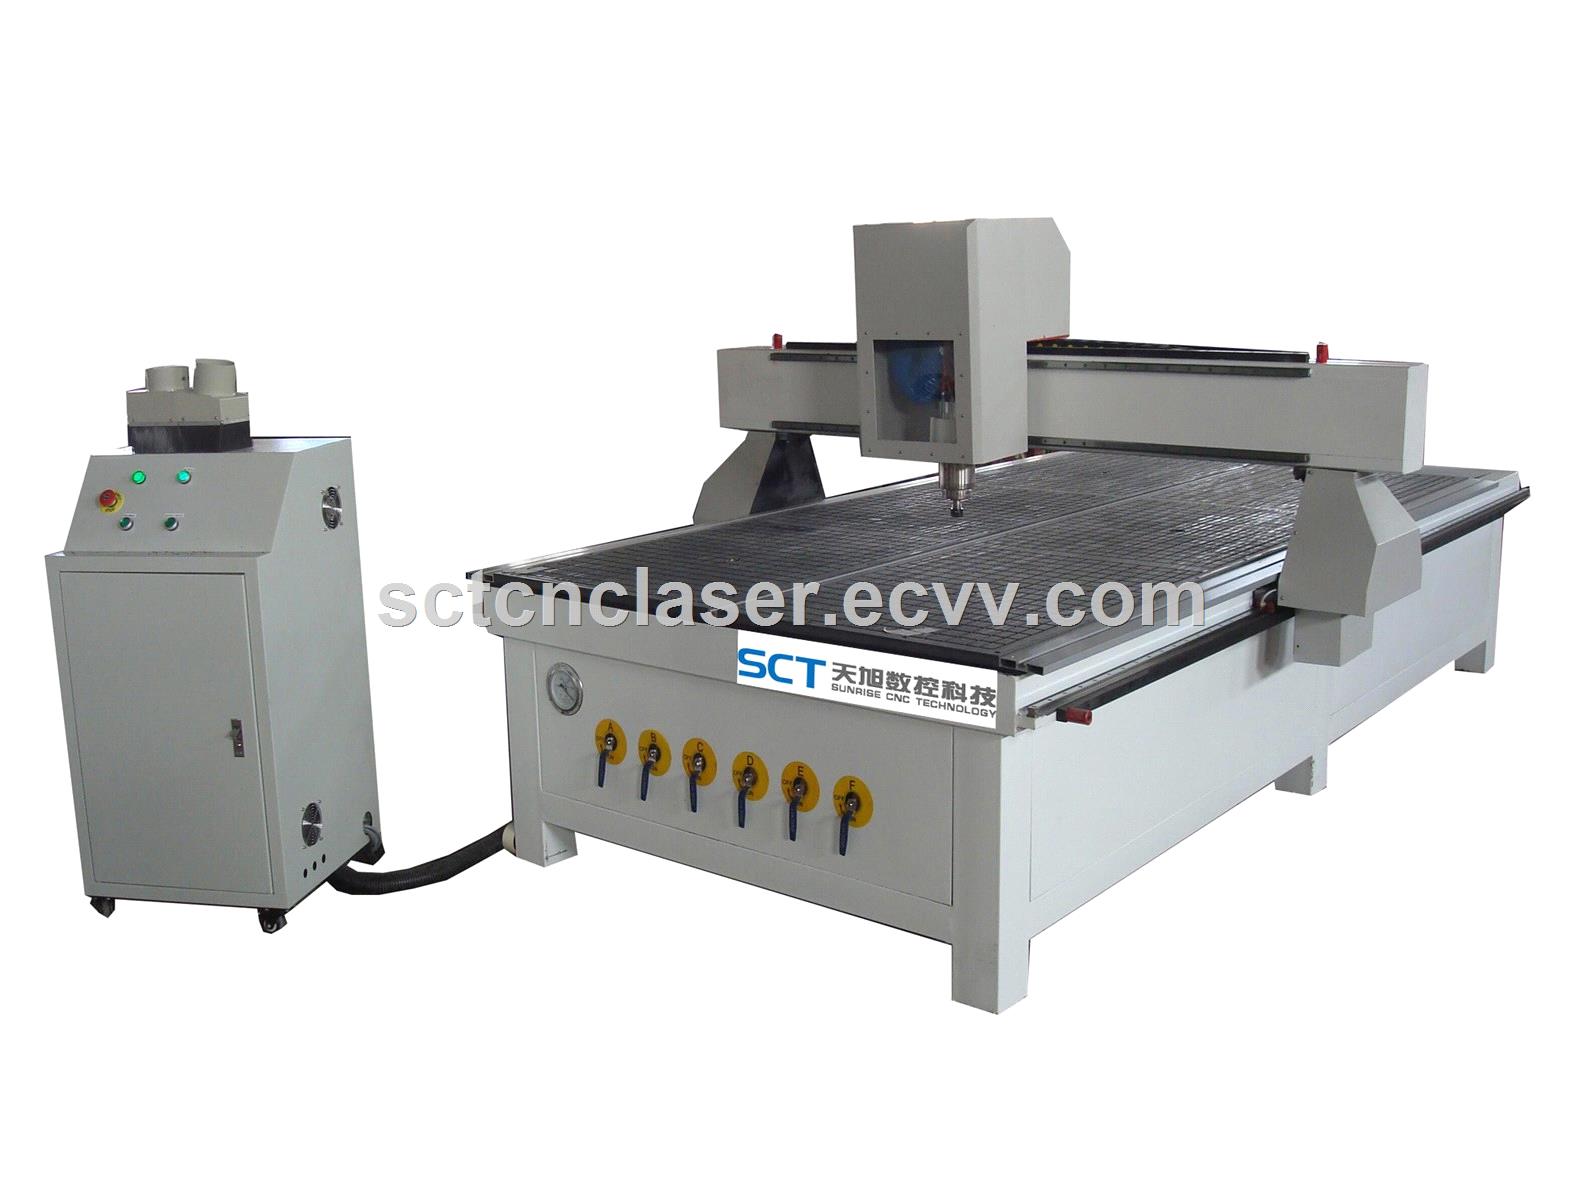 SCTW1530 Woodworking cnc router machinery with DSP